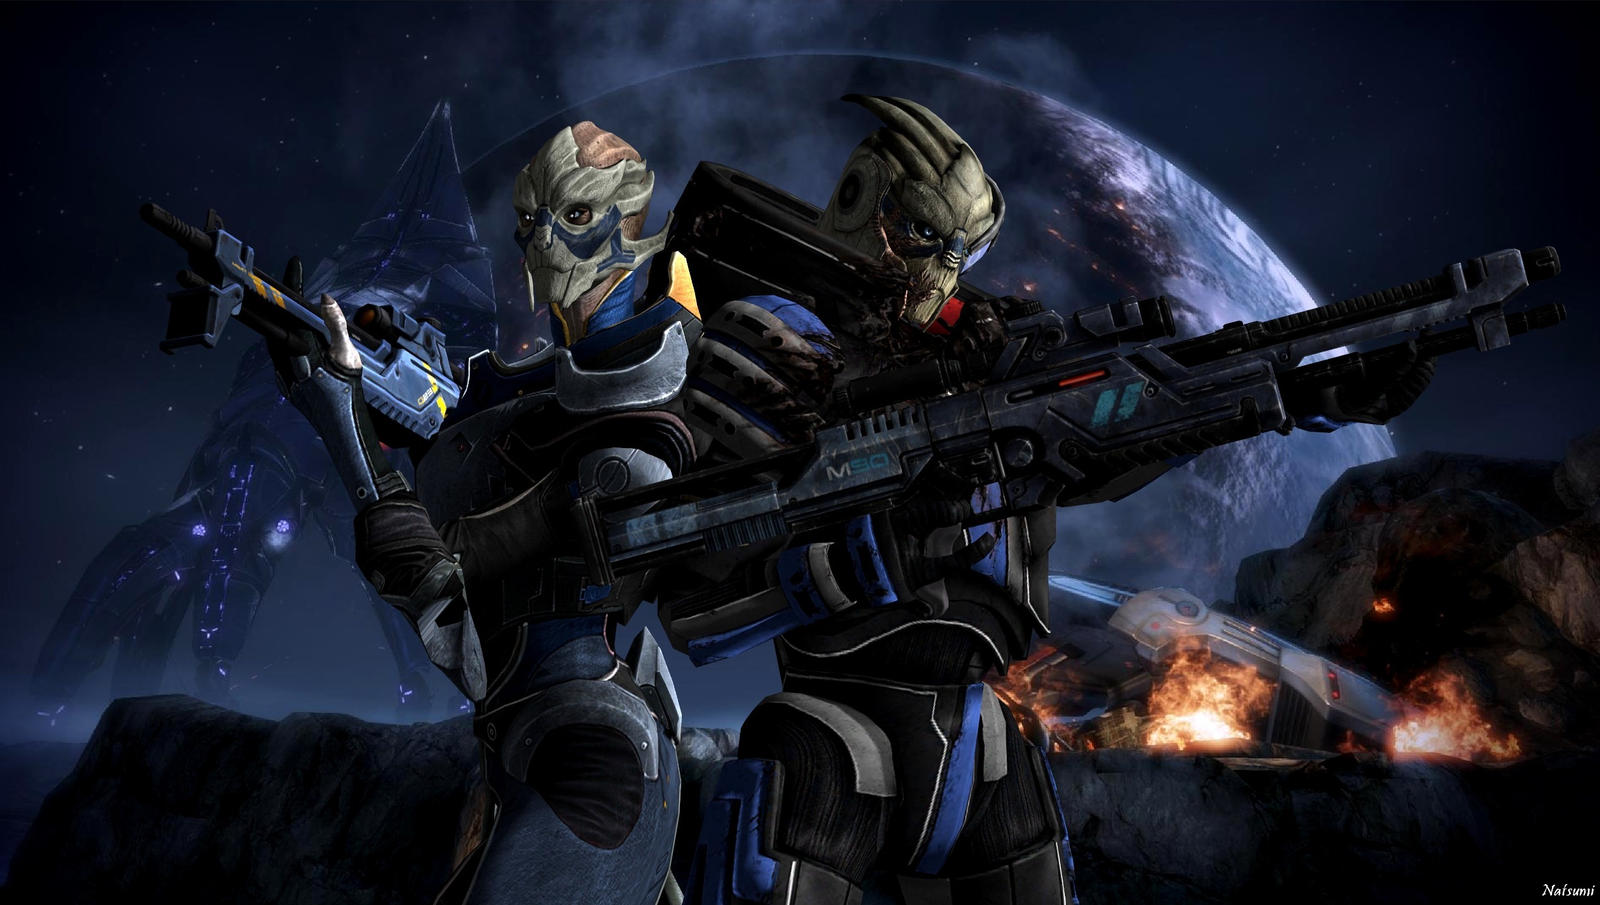 the_vakarian_siblings___garrus_and_solona_by_natsumi494-d6atknz.jpg